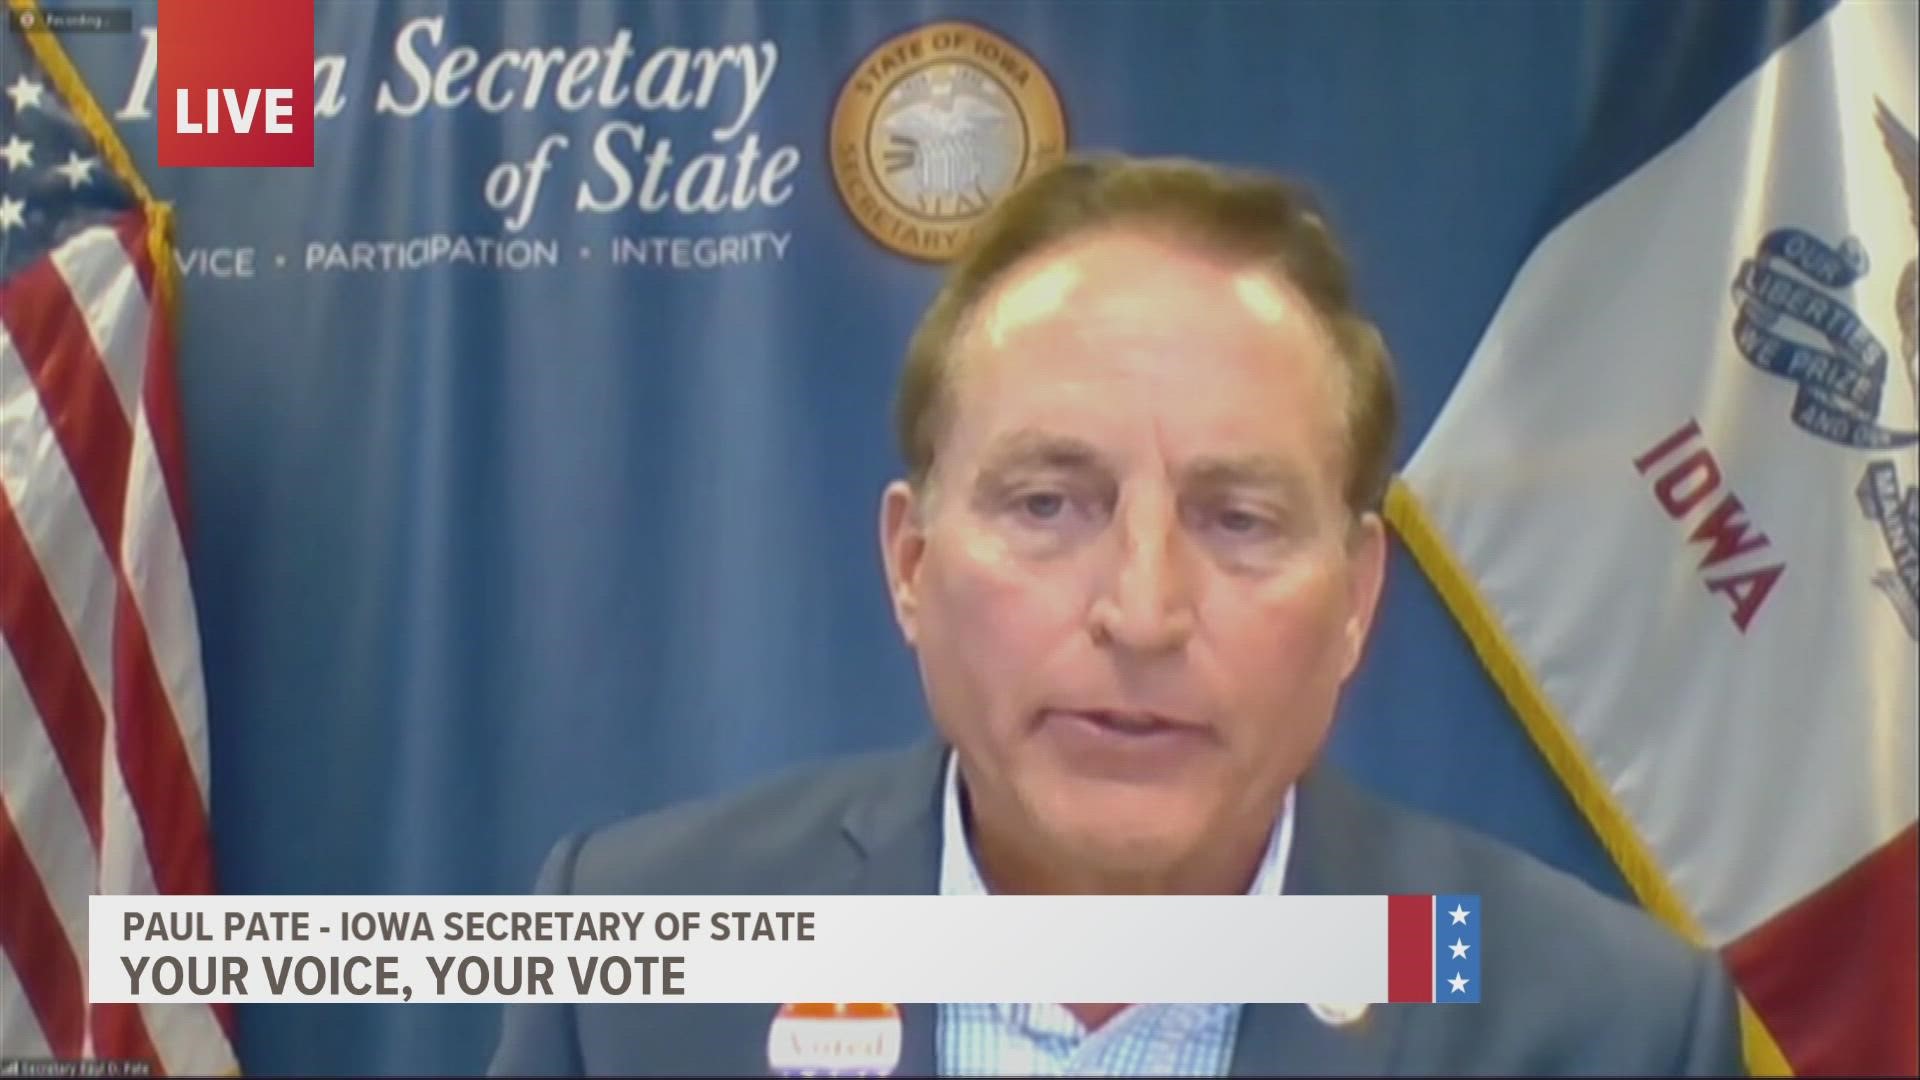 Paul Pate serves as the chief election officer in Iowa. His office saw over 300,000 people cast a ballot tonight.